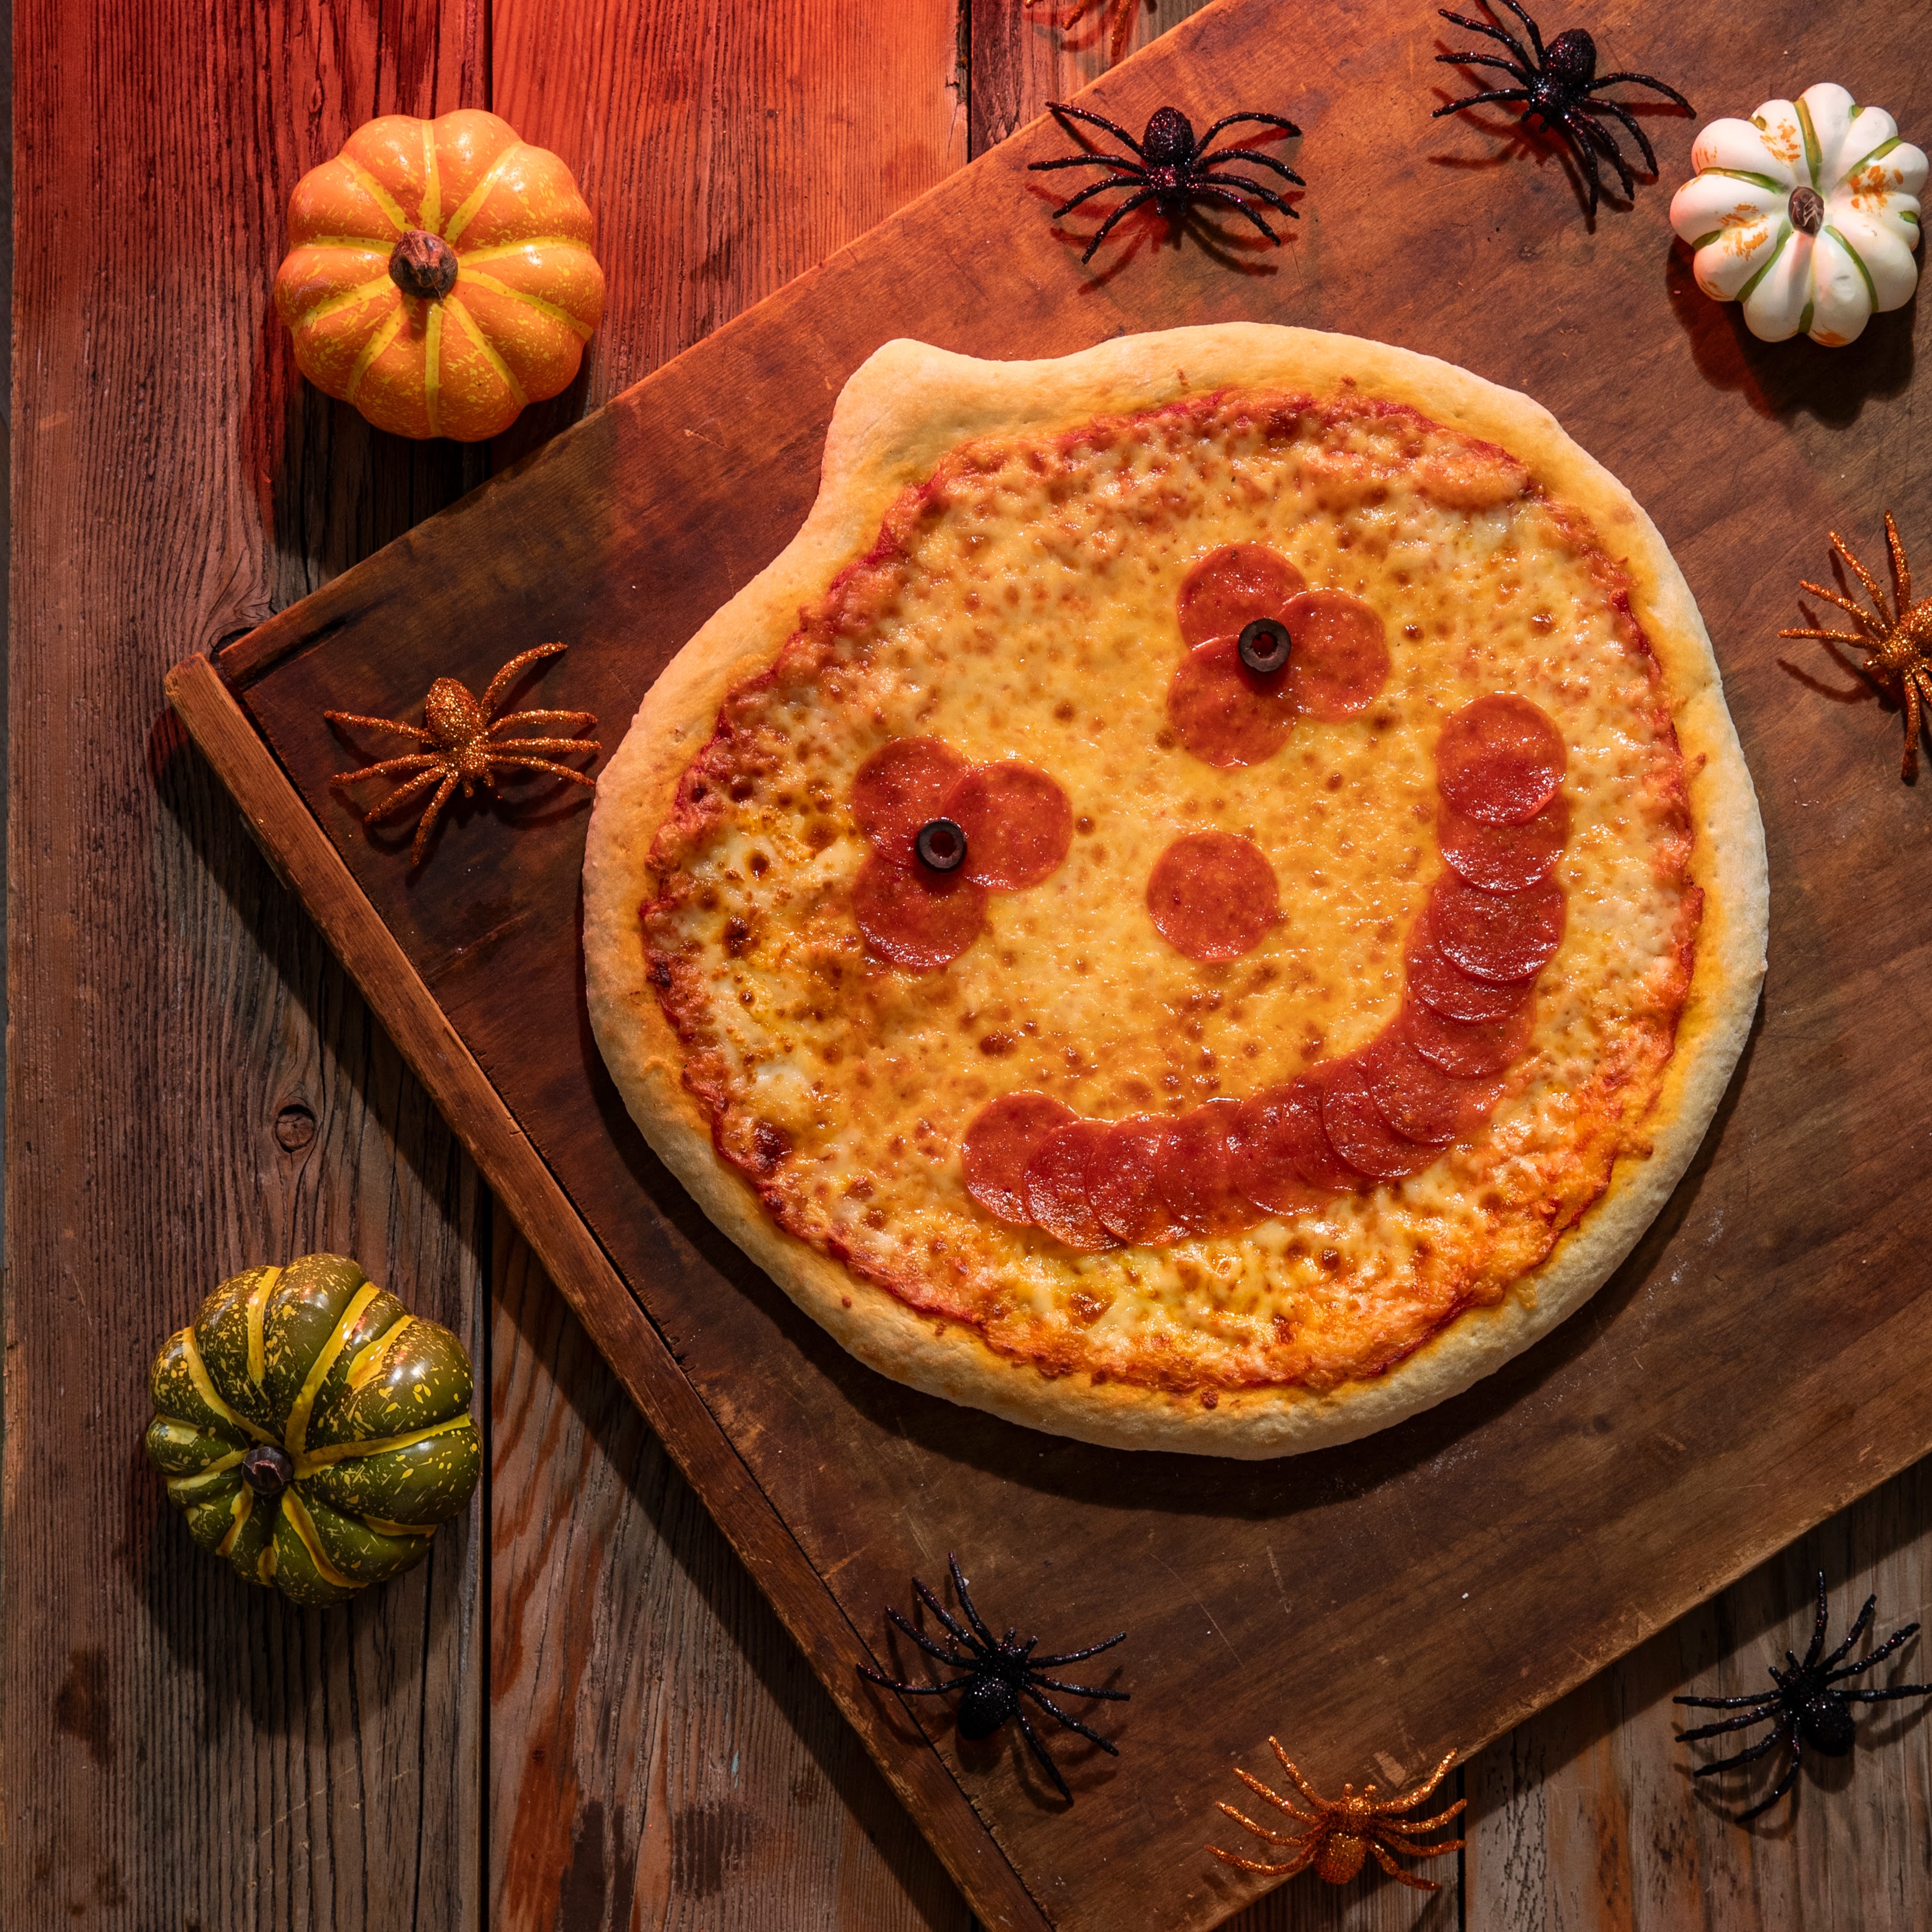 A Jack-O'-Lantern Halloween Pizza on a table with mini pumpkins and spiders